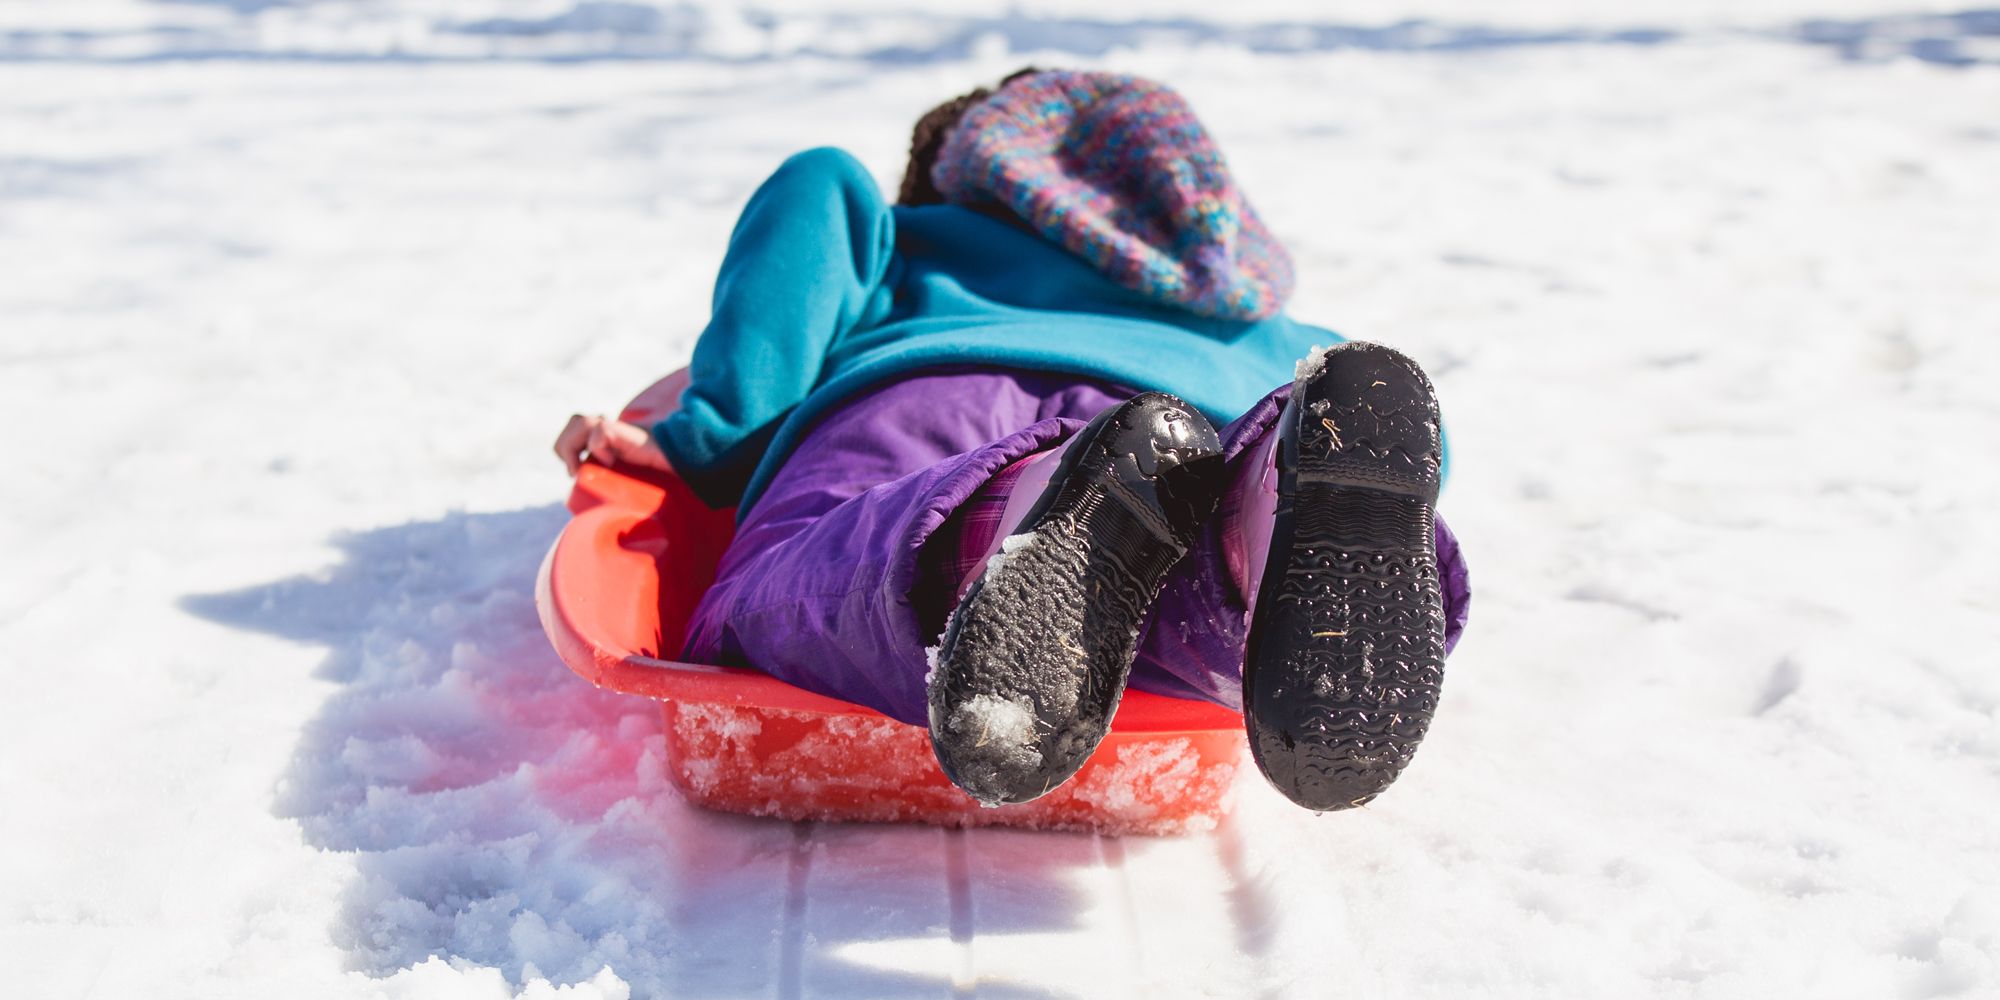 What To Wear Sledding: Best Gear To Wear For Snow Play - FUNBOY